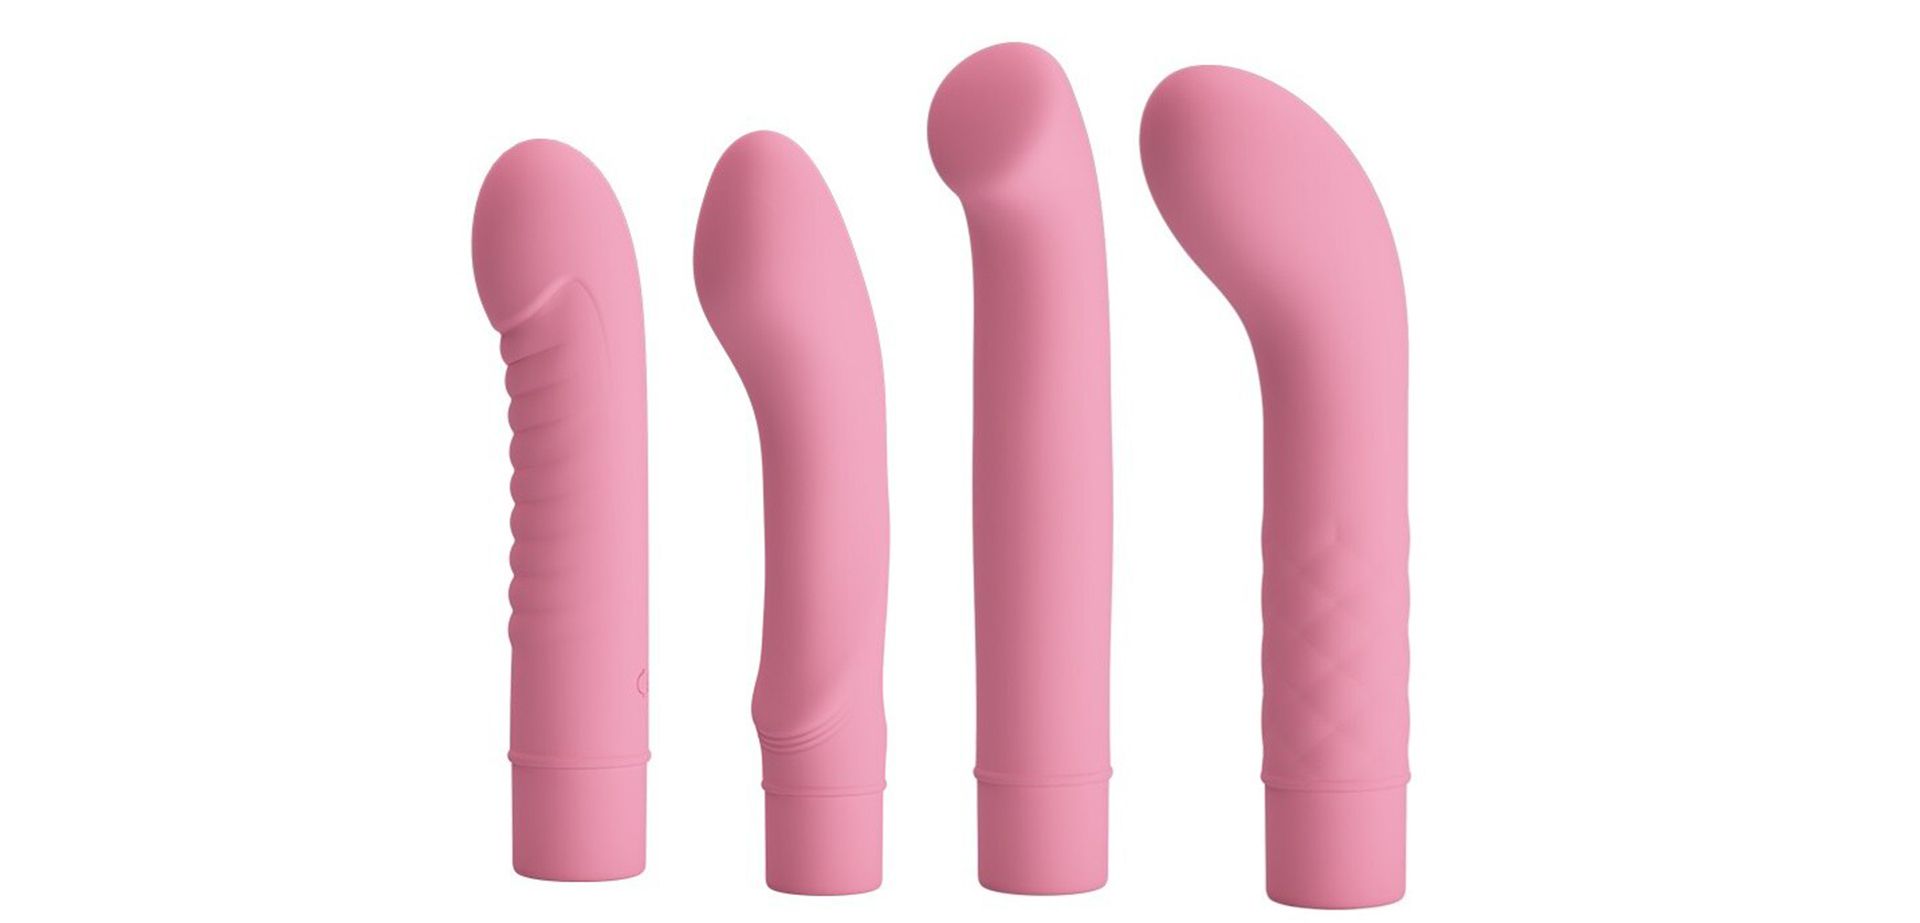 Shapes Of Silicone Beginner Dildos.